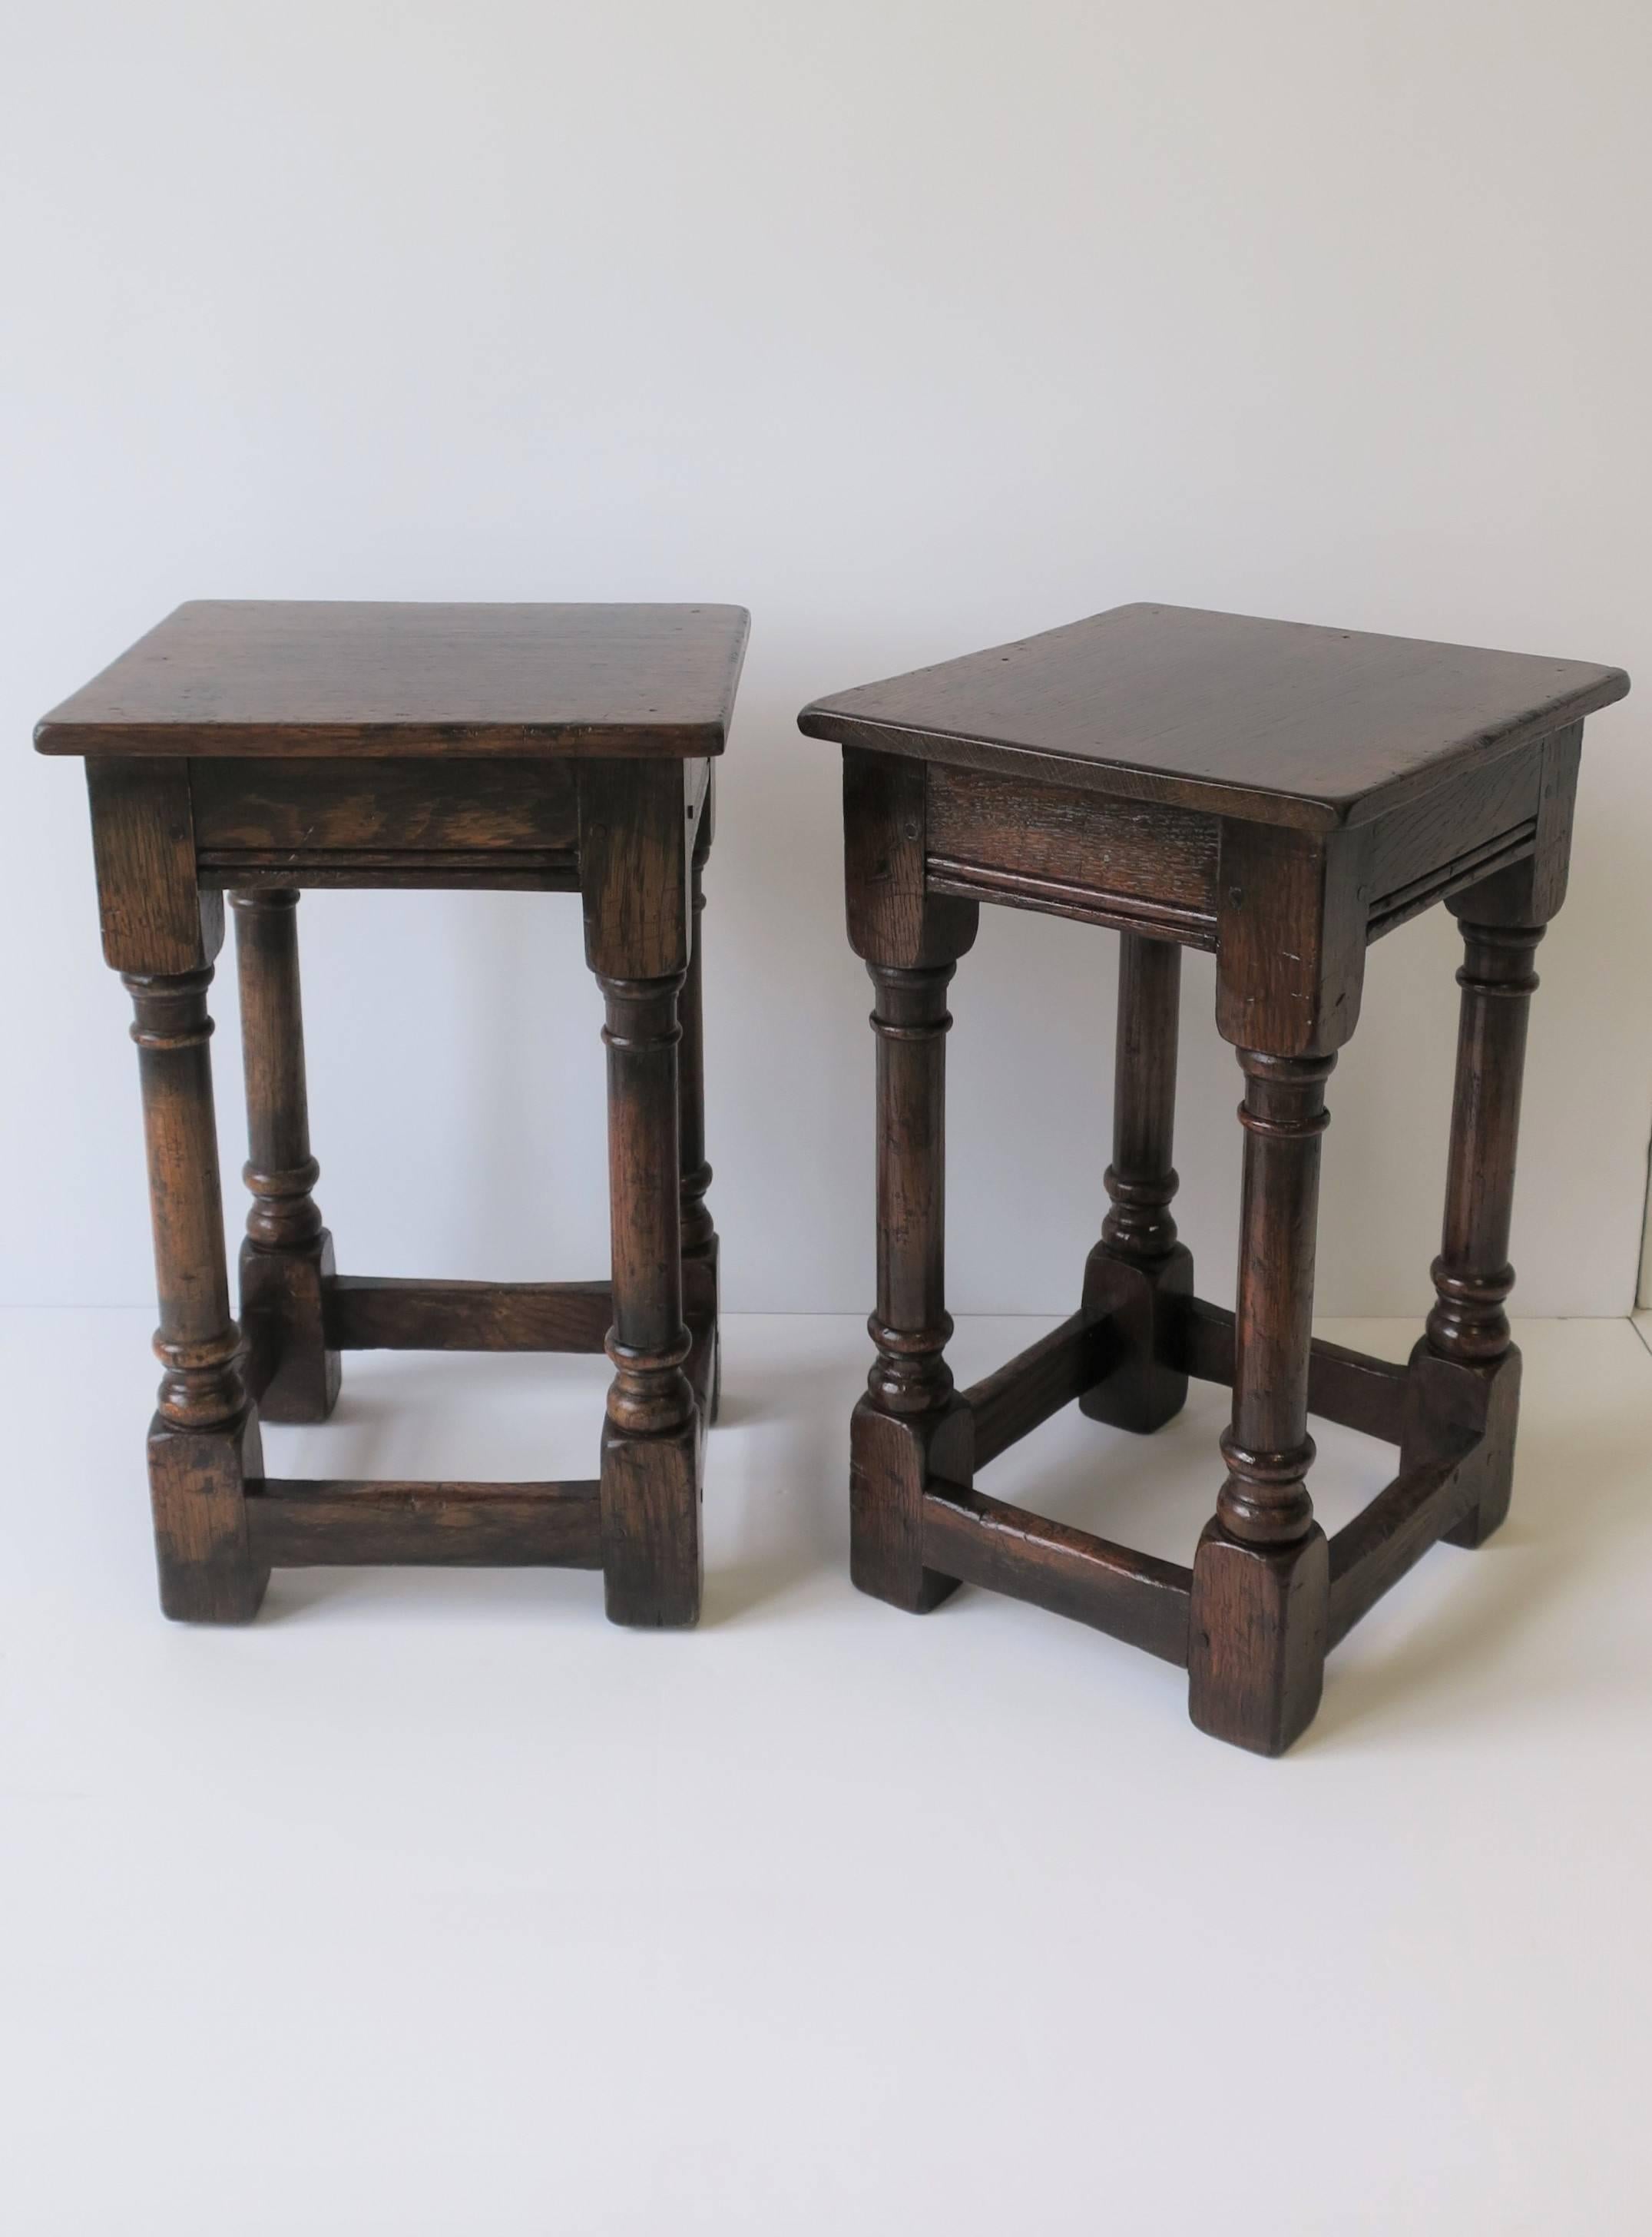 Jacobean Style Wood Side Tables or Stools (Jakobinisch)